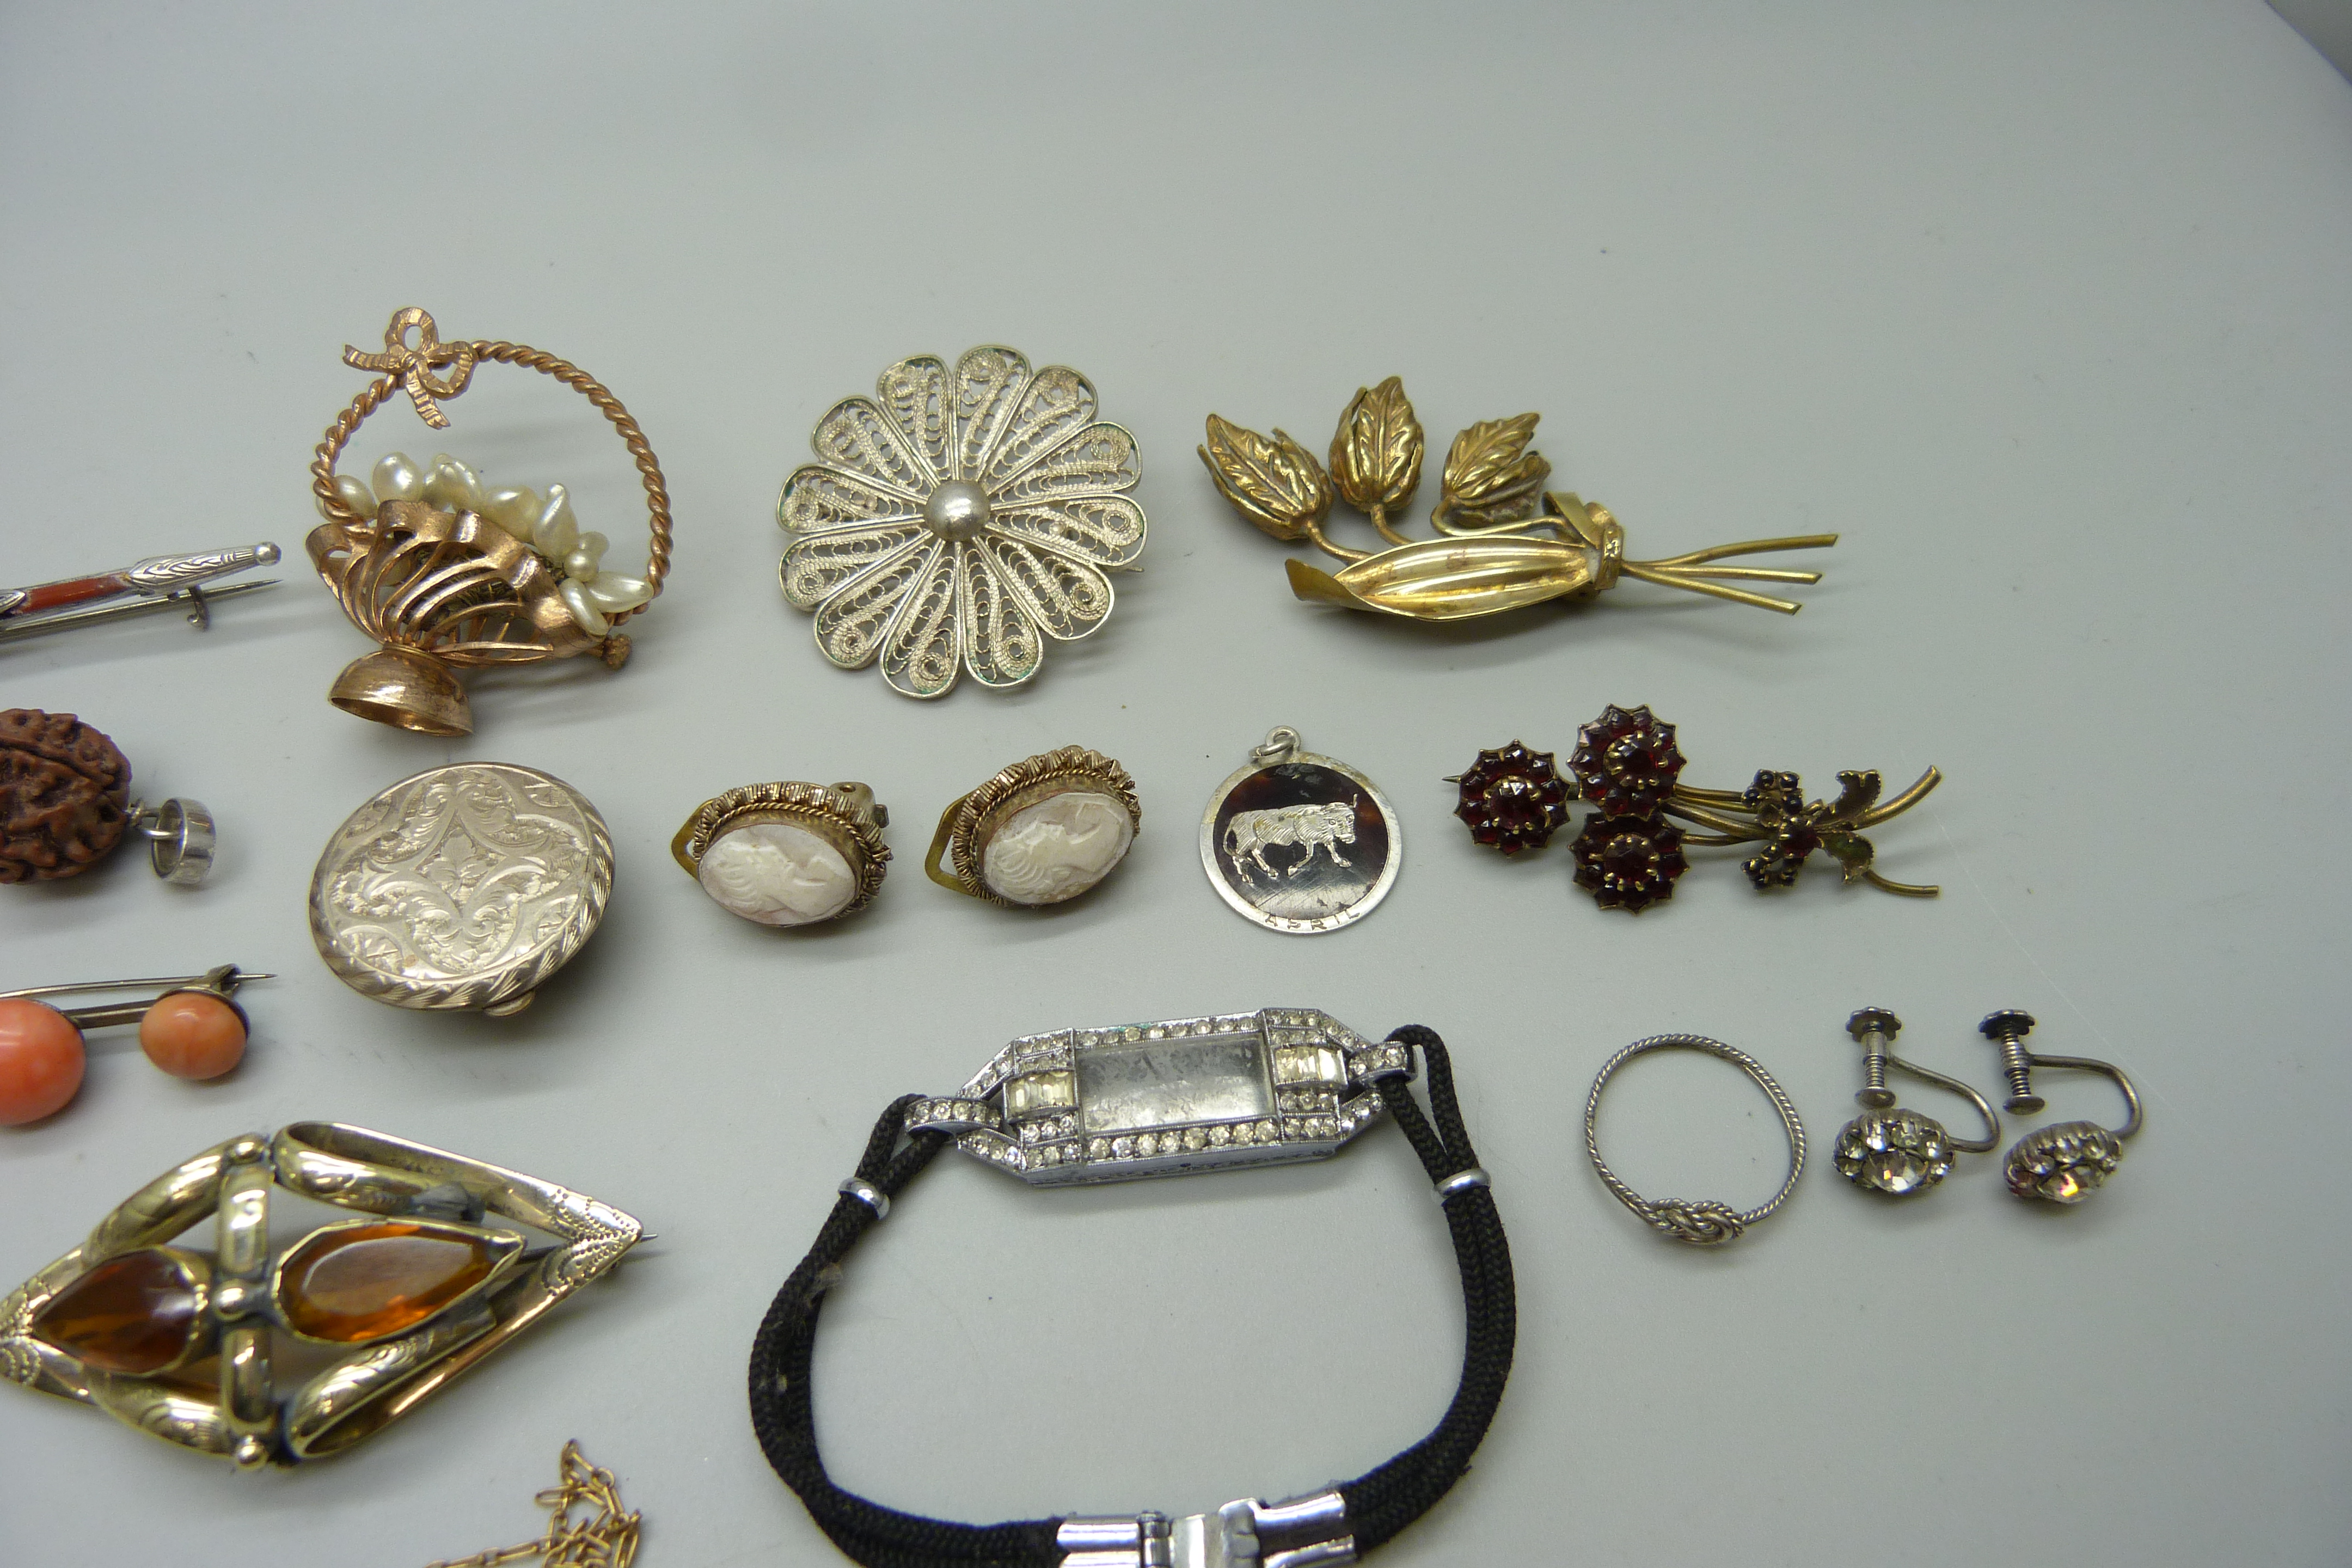 Vintage jewellery including a coral brooch, a silver anchor brooch, etc. - Image 3 of 3